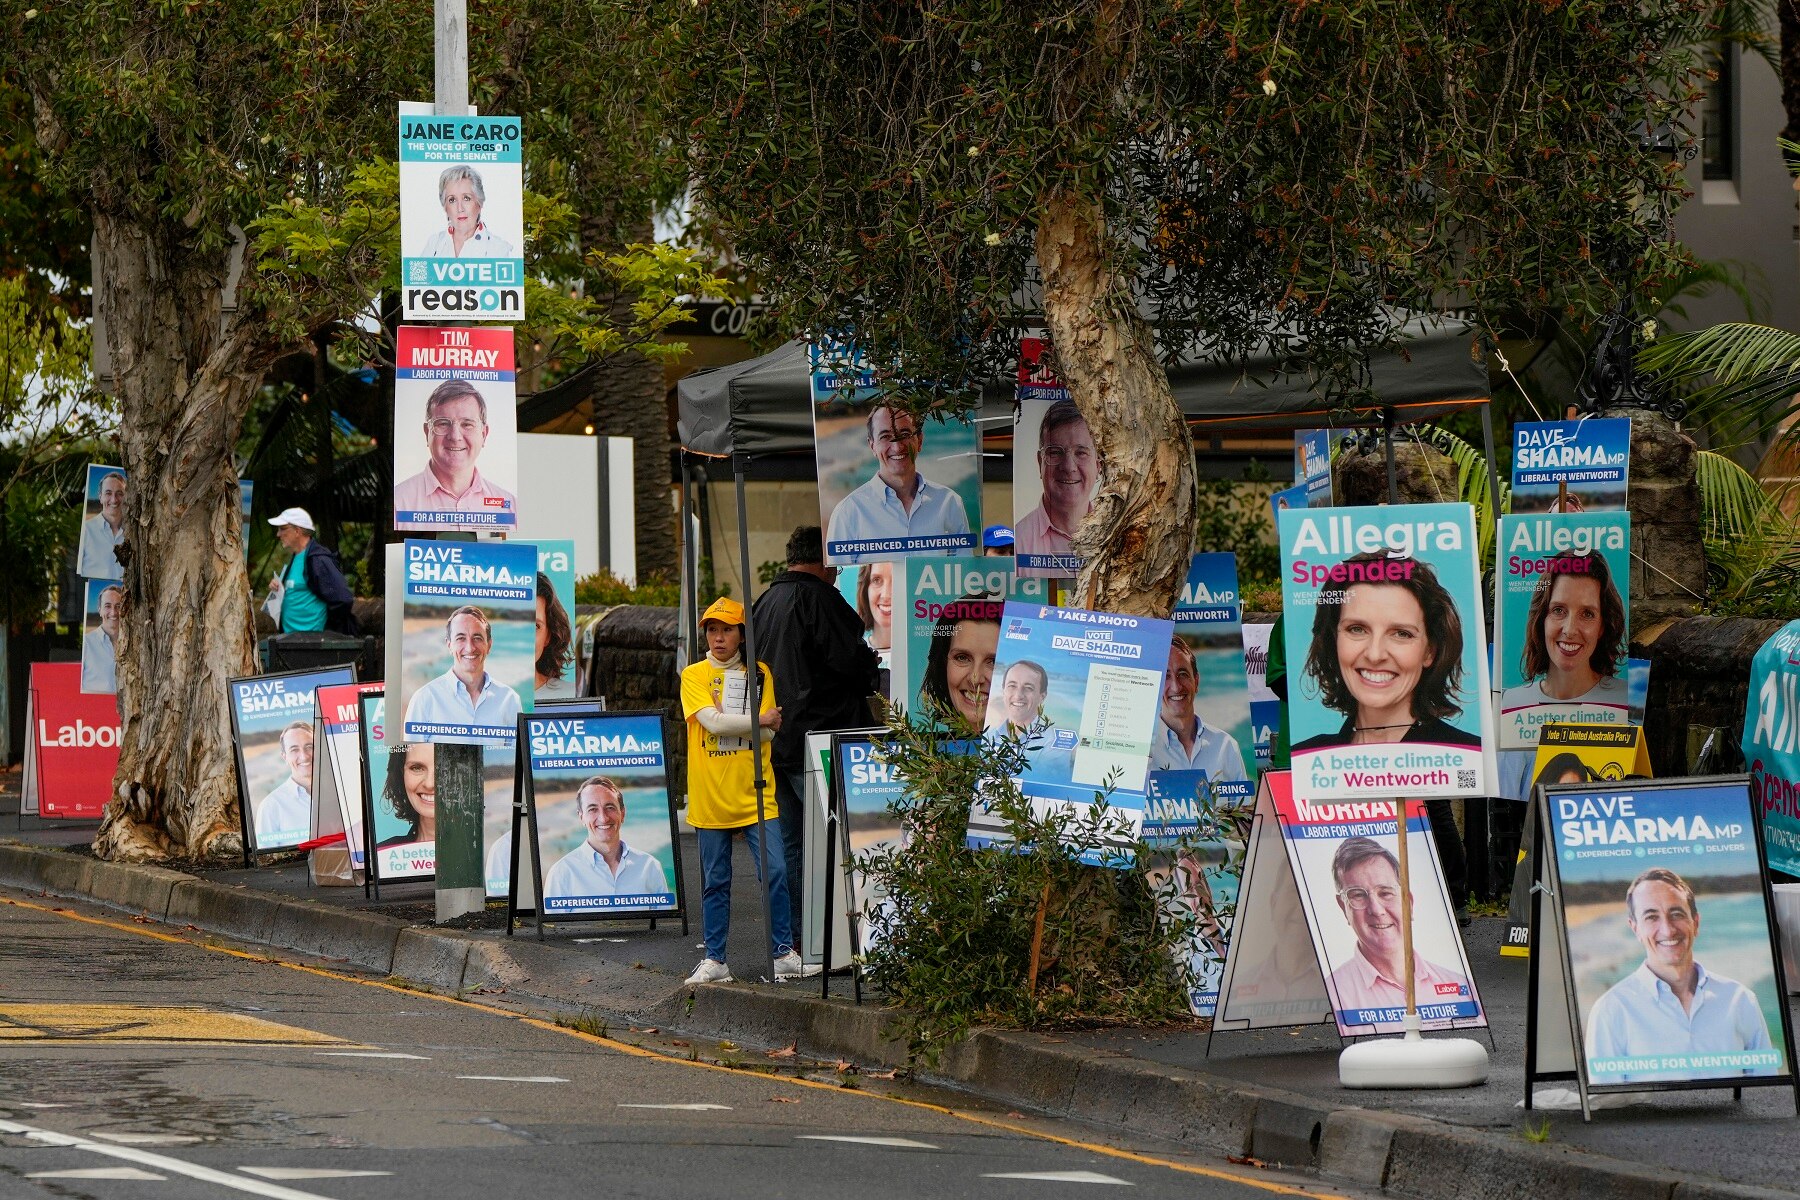 Early voting has begun in Australias federal election with the opposition party hoping the first ballots will reflect its lead over the government in opinion poll.